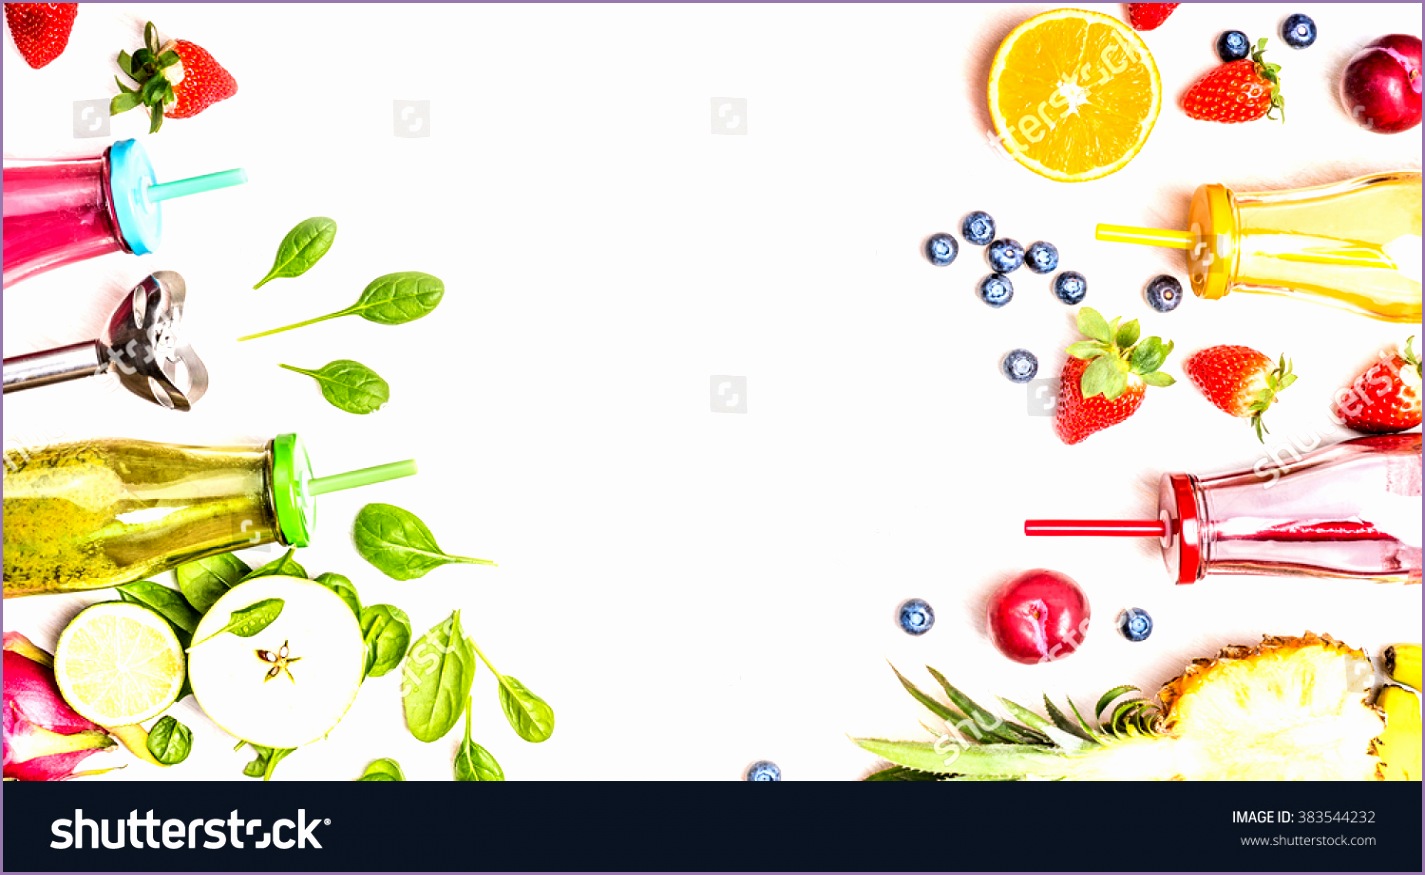 healthy lifestyle background various colorful smoothie src=d4y3ox04ArTYCinkohVlgQ 1 86